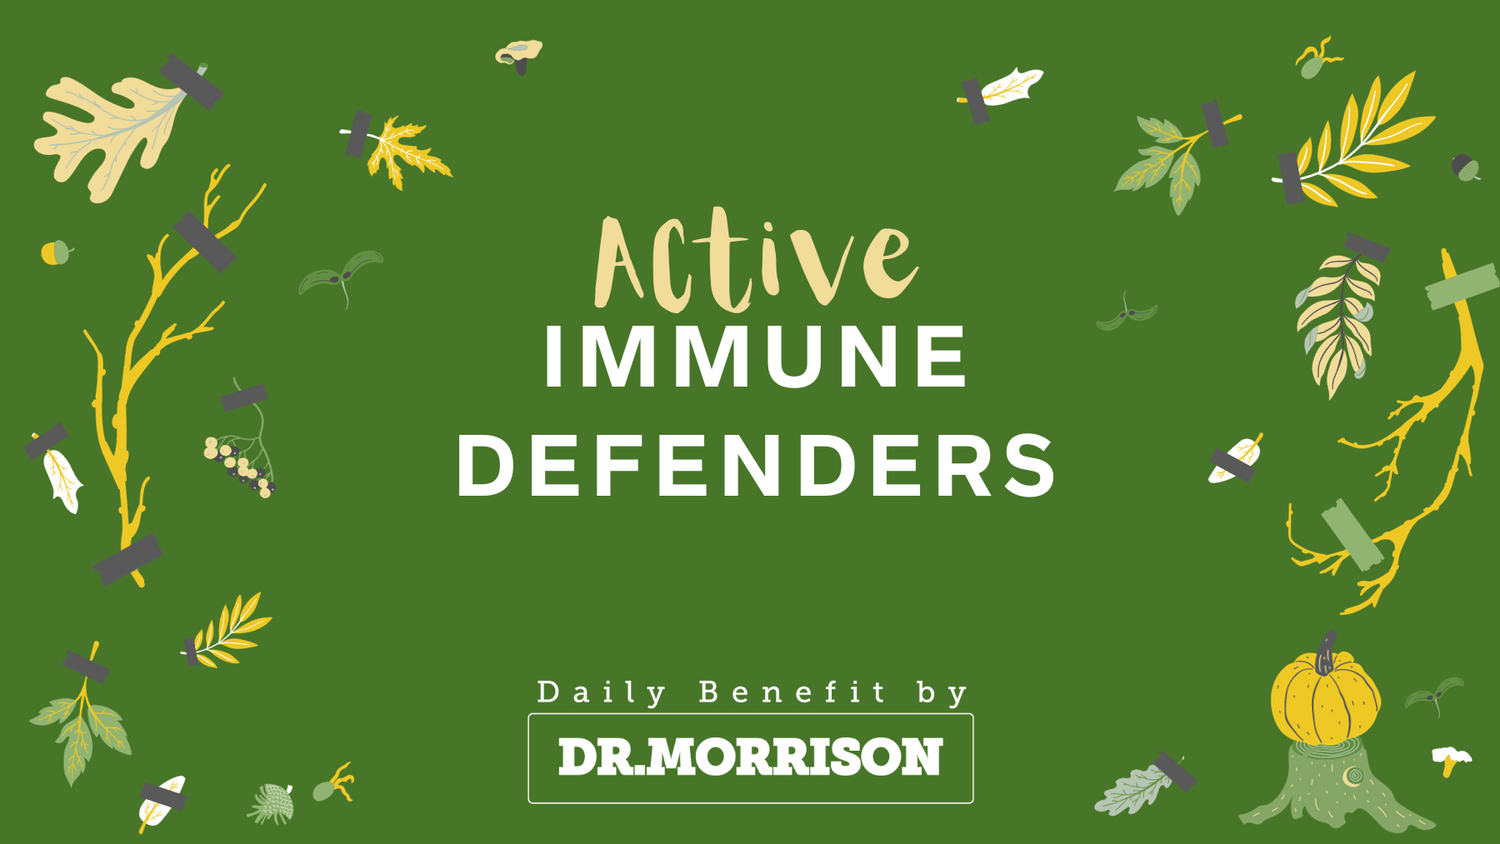 Meet the Immune Defenders: Your Active Illness Support